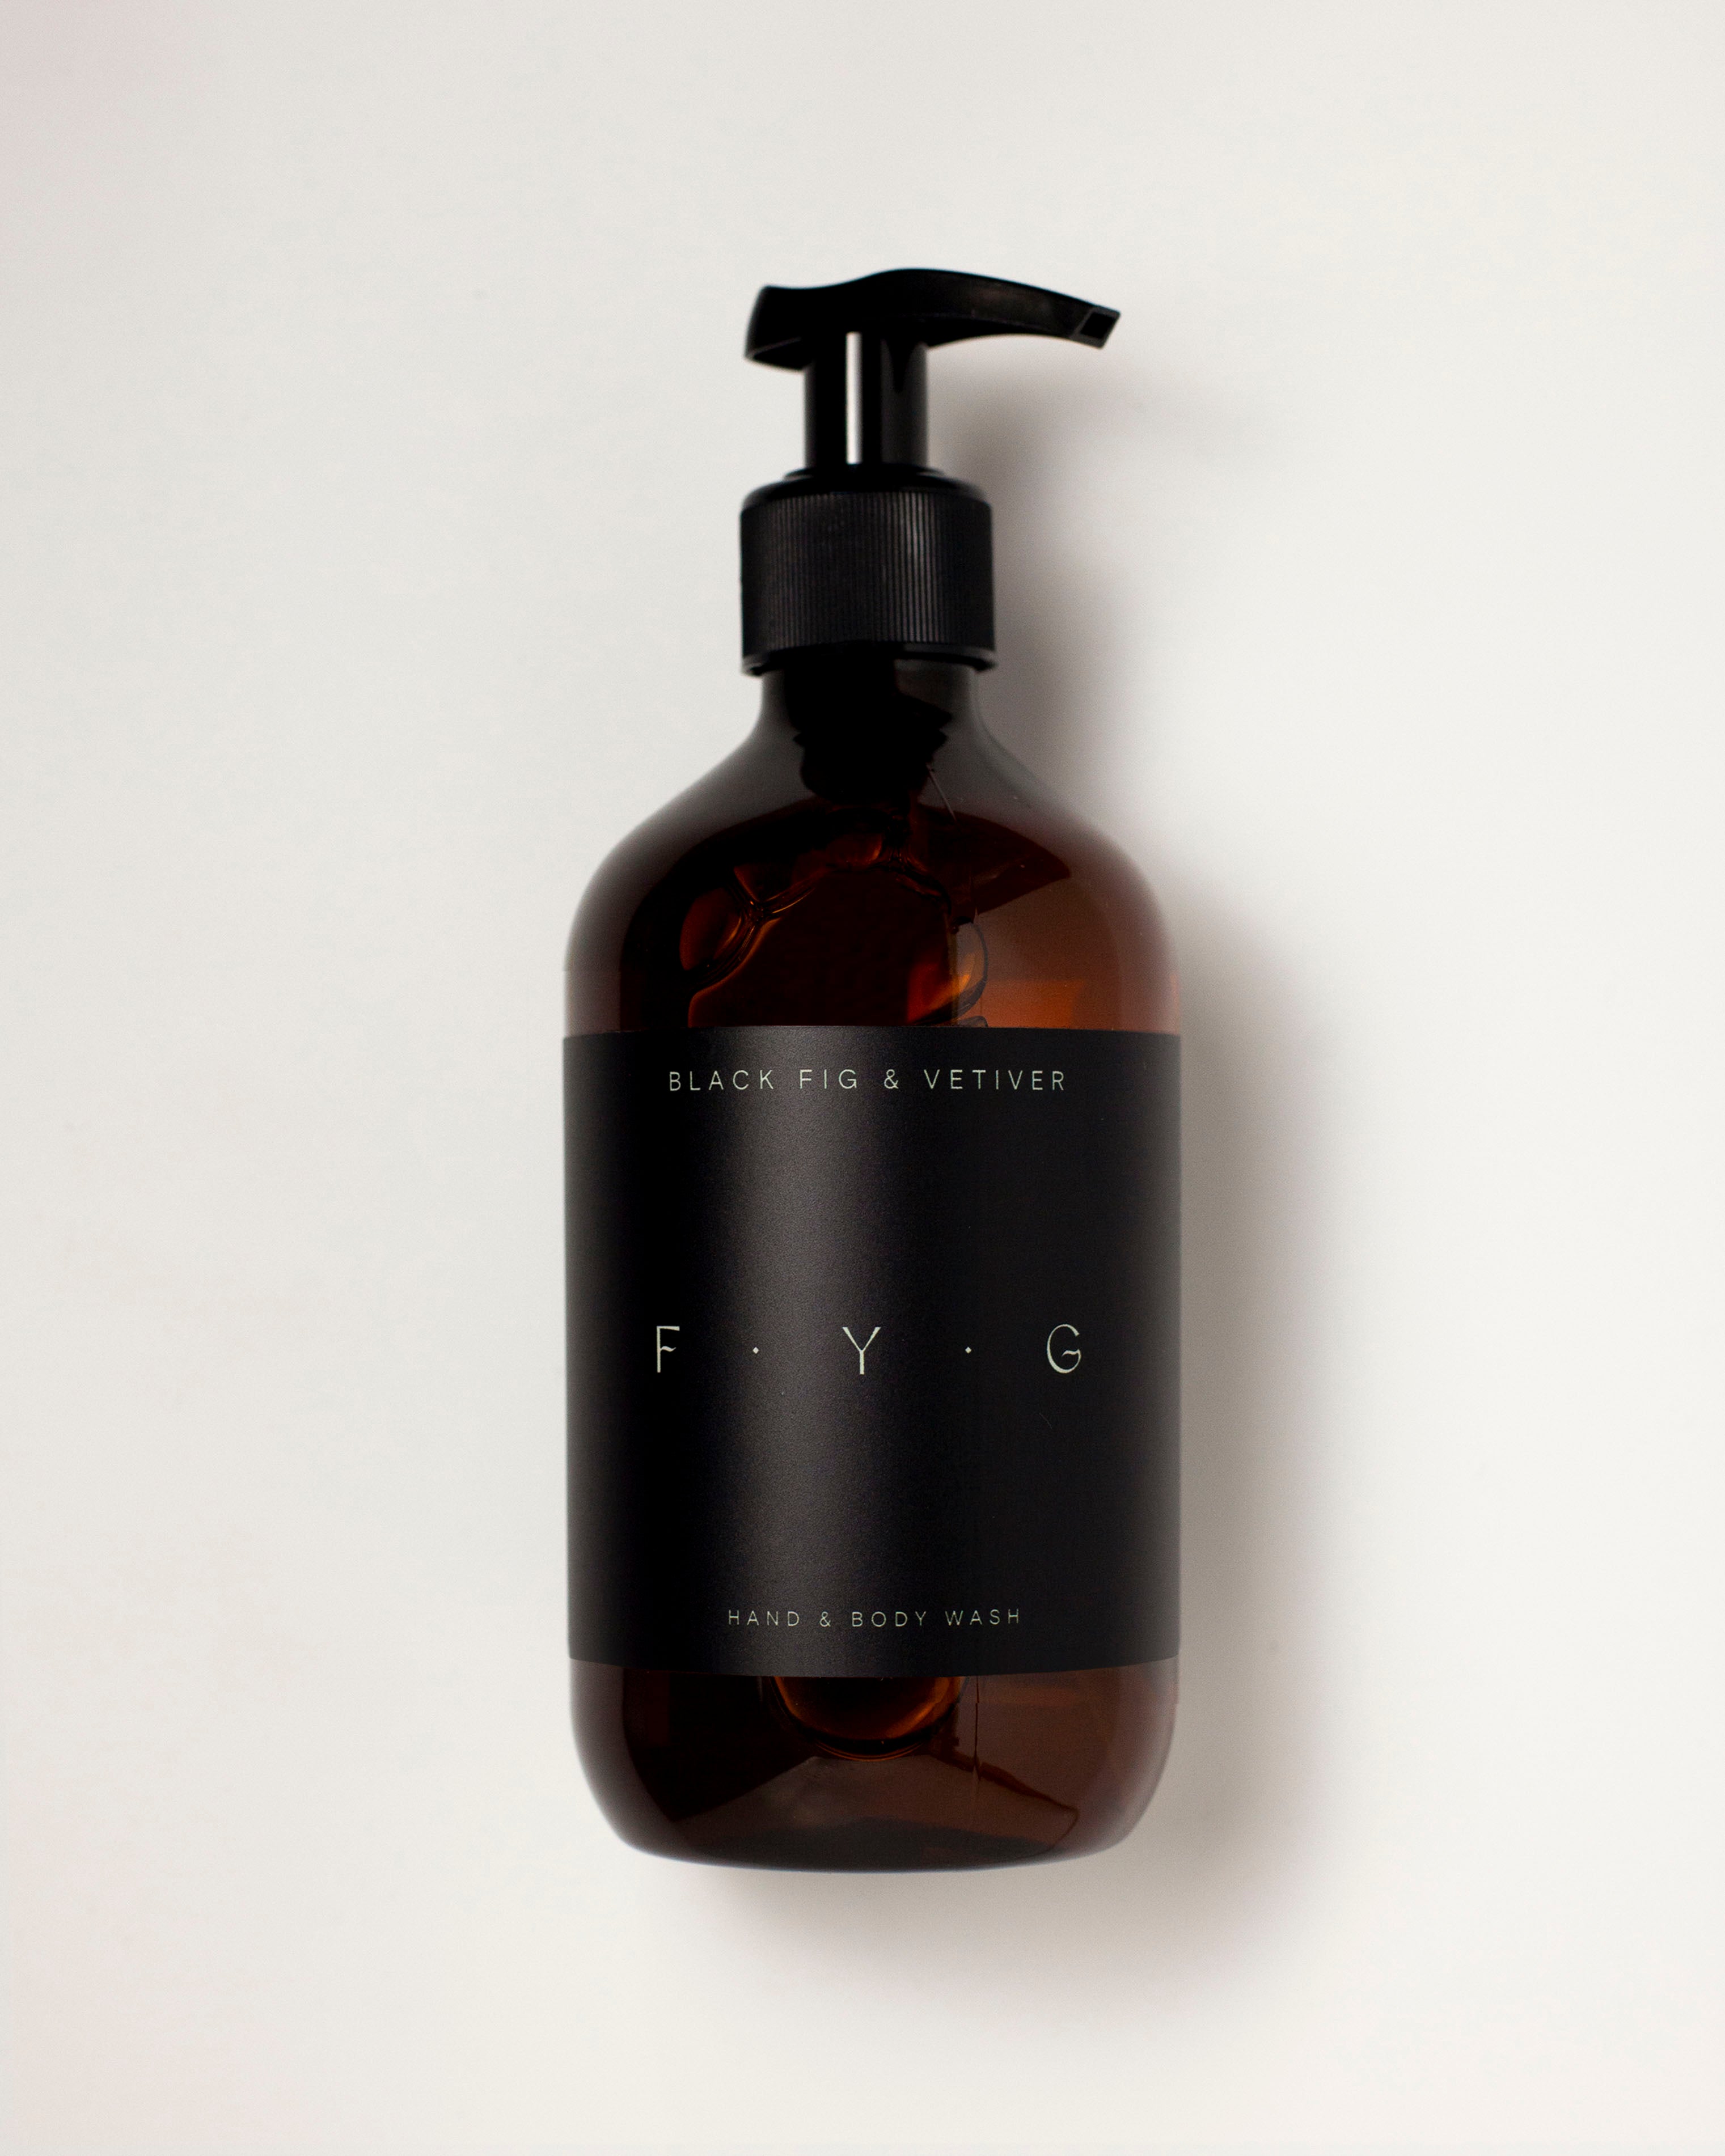 Find Your Glow Black Fig & Vetiver Hand & Body Wash